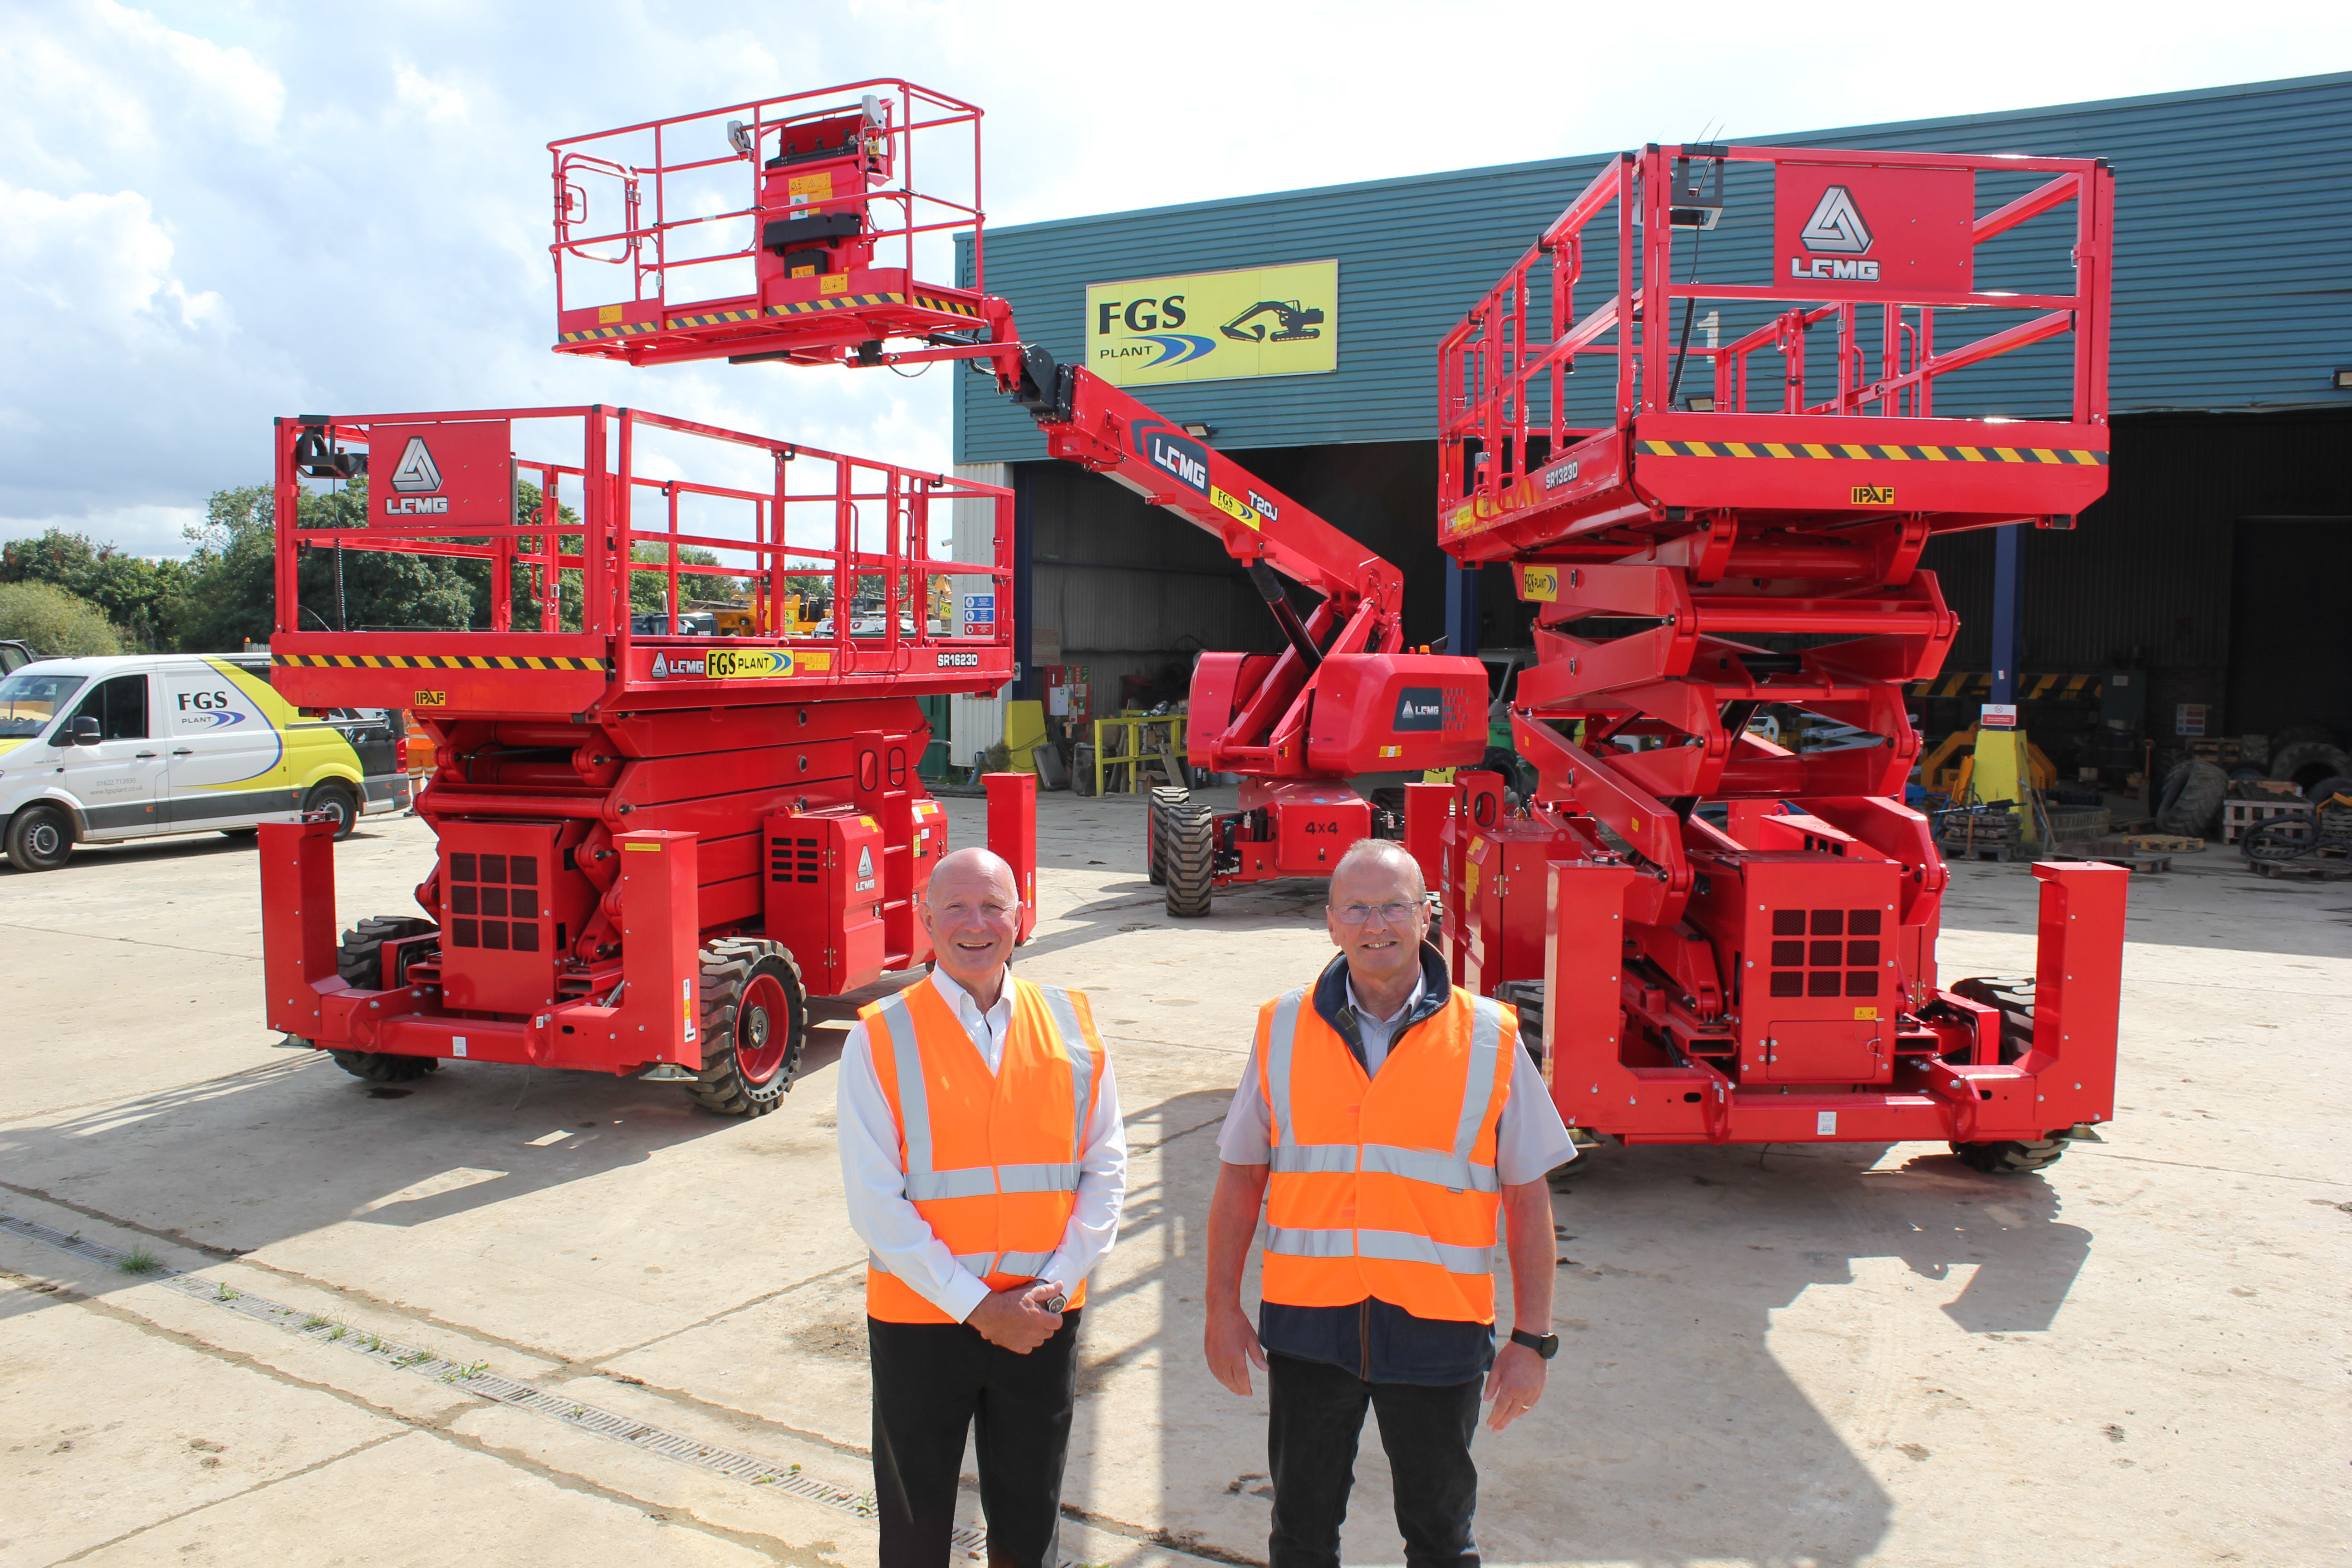 FGS Plant places record order with APS for LGMG platforms 